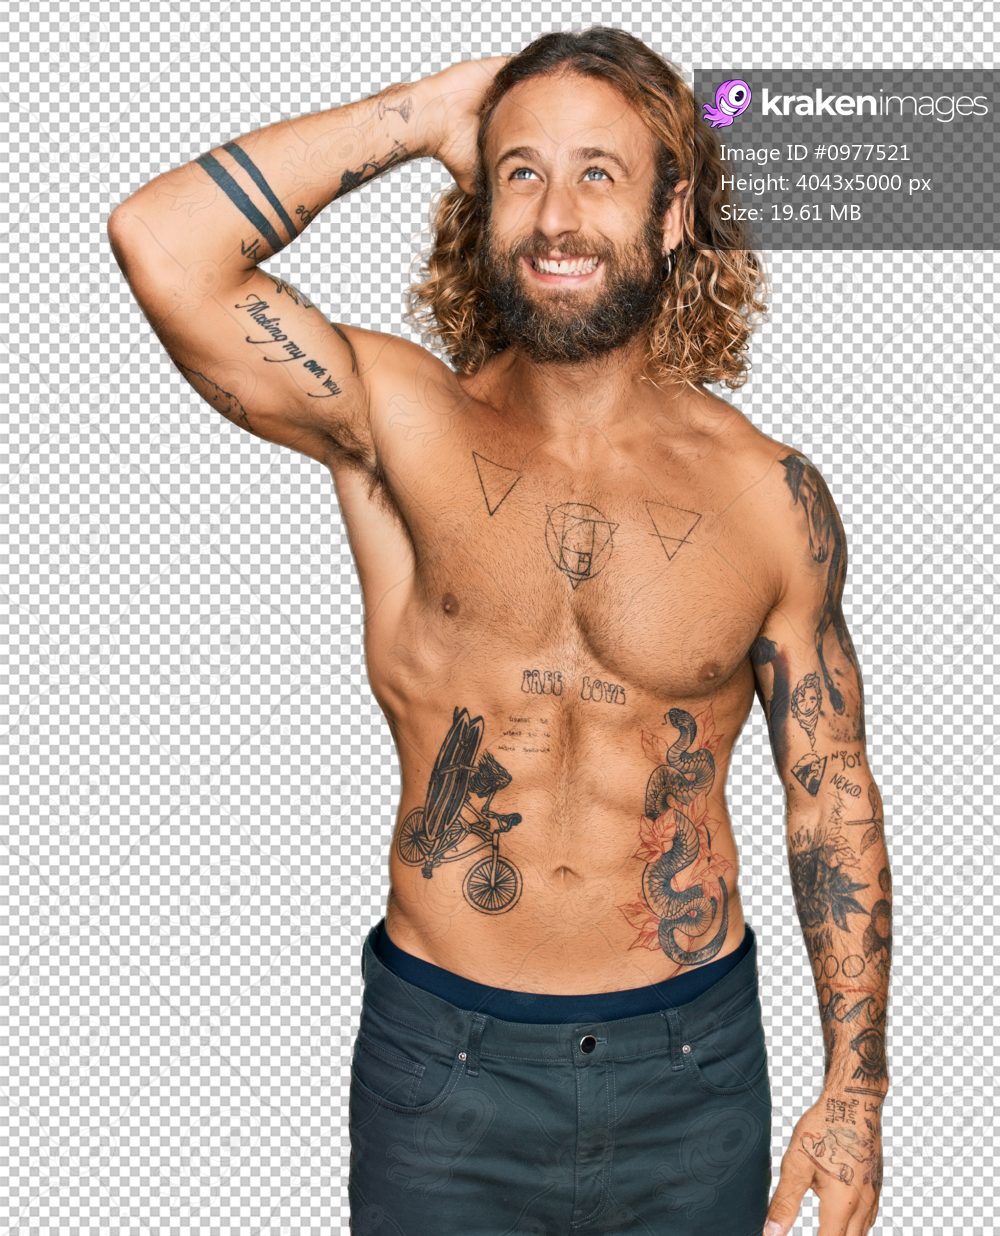 Handsome man with beard and long hair standing shirtless showing tattoos  smiling confident touching hair with hand up gesture, posing attractive and  fashionable - Kraken Images